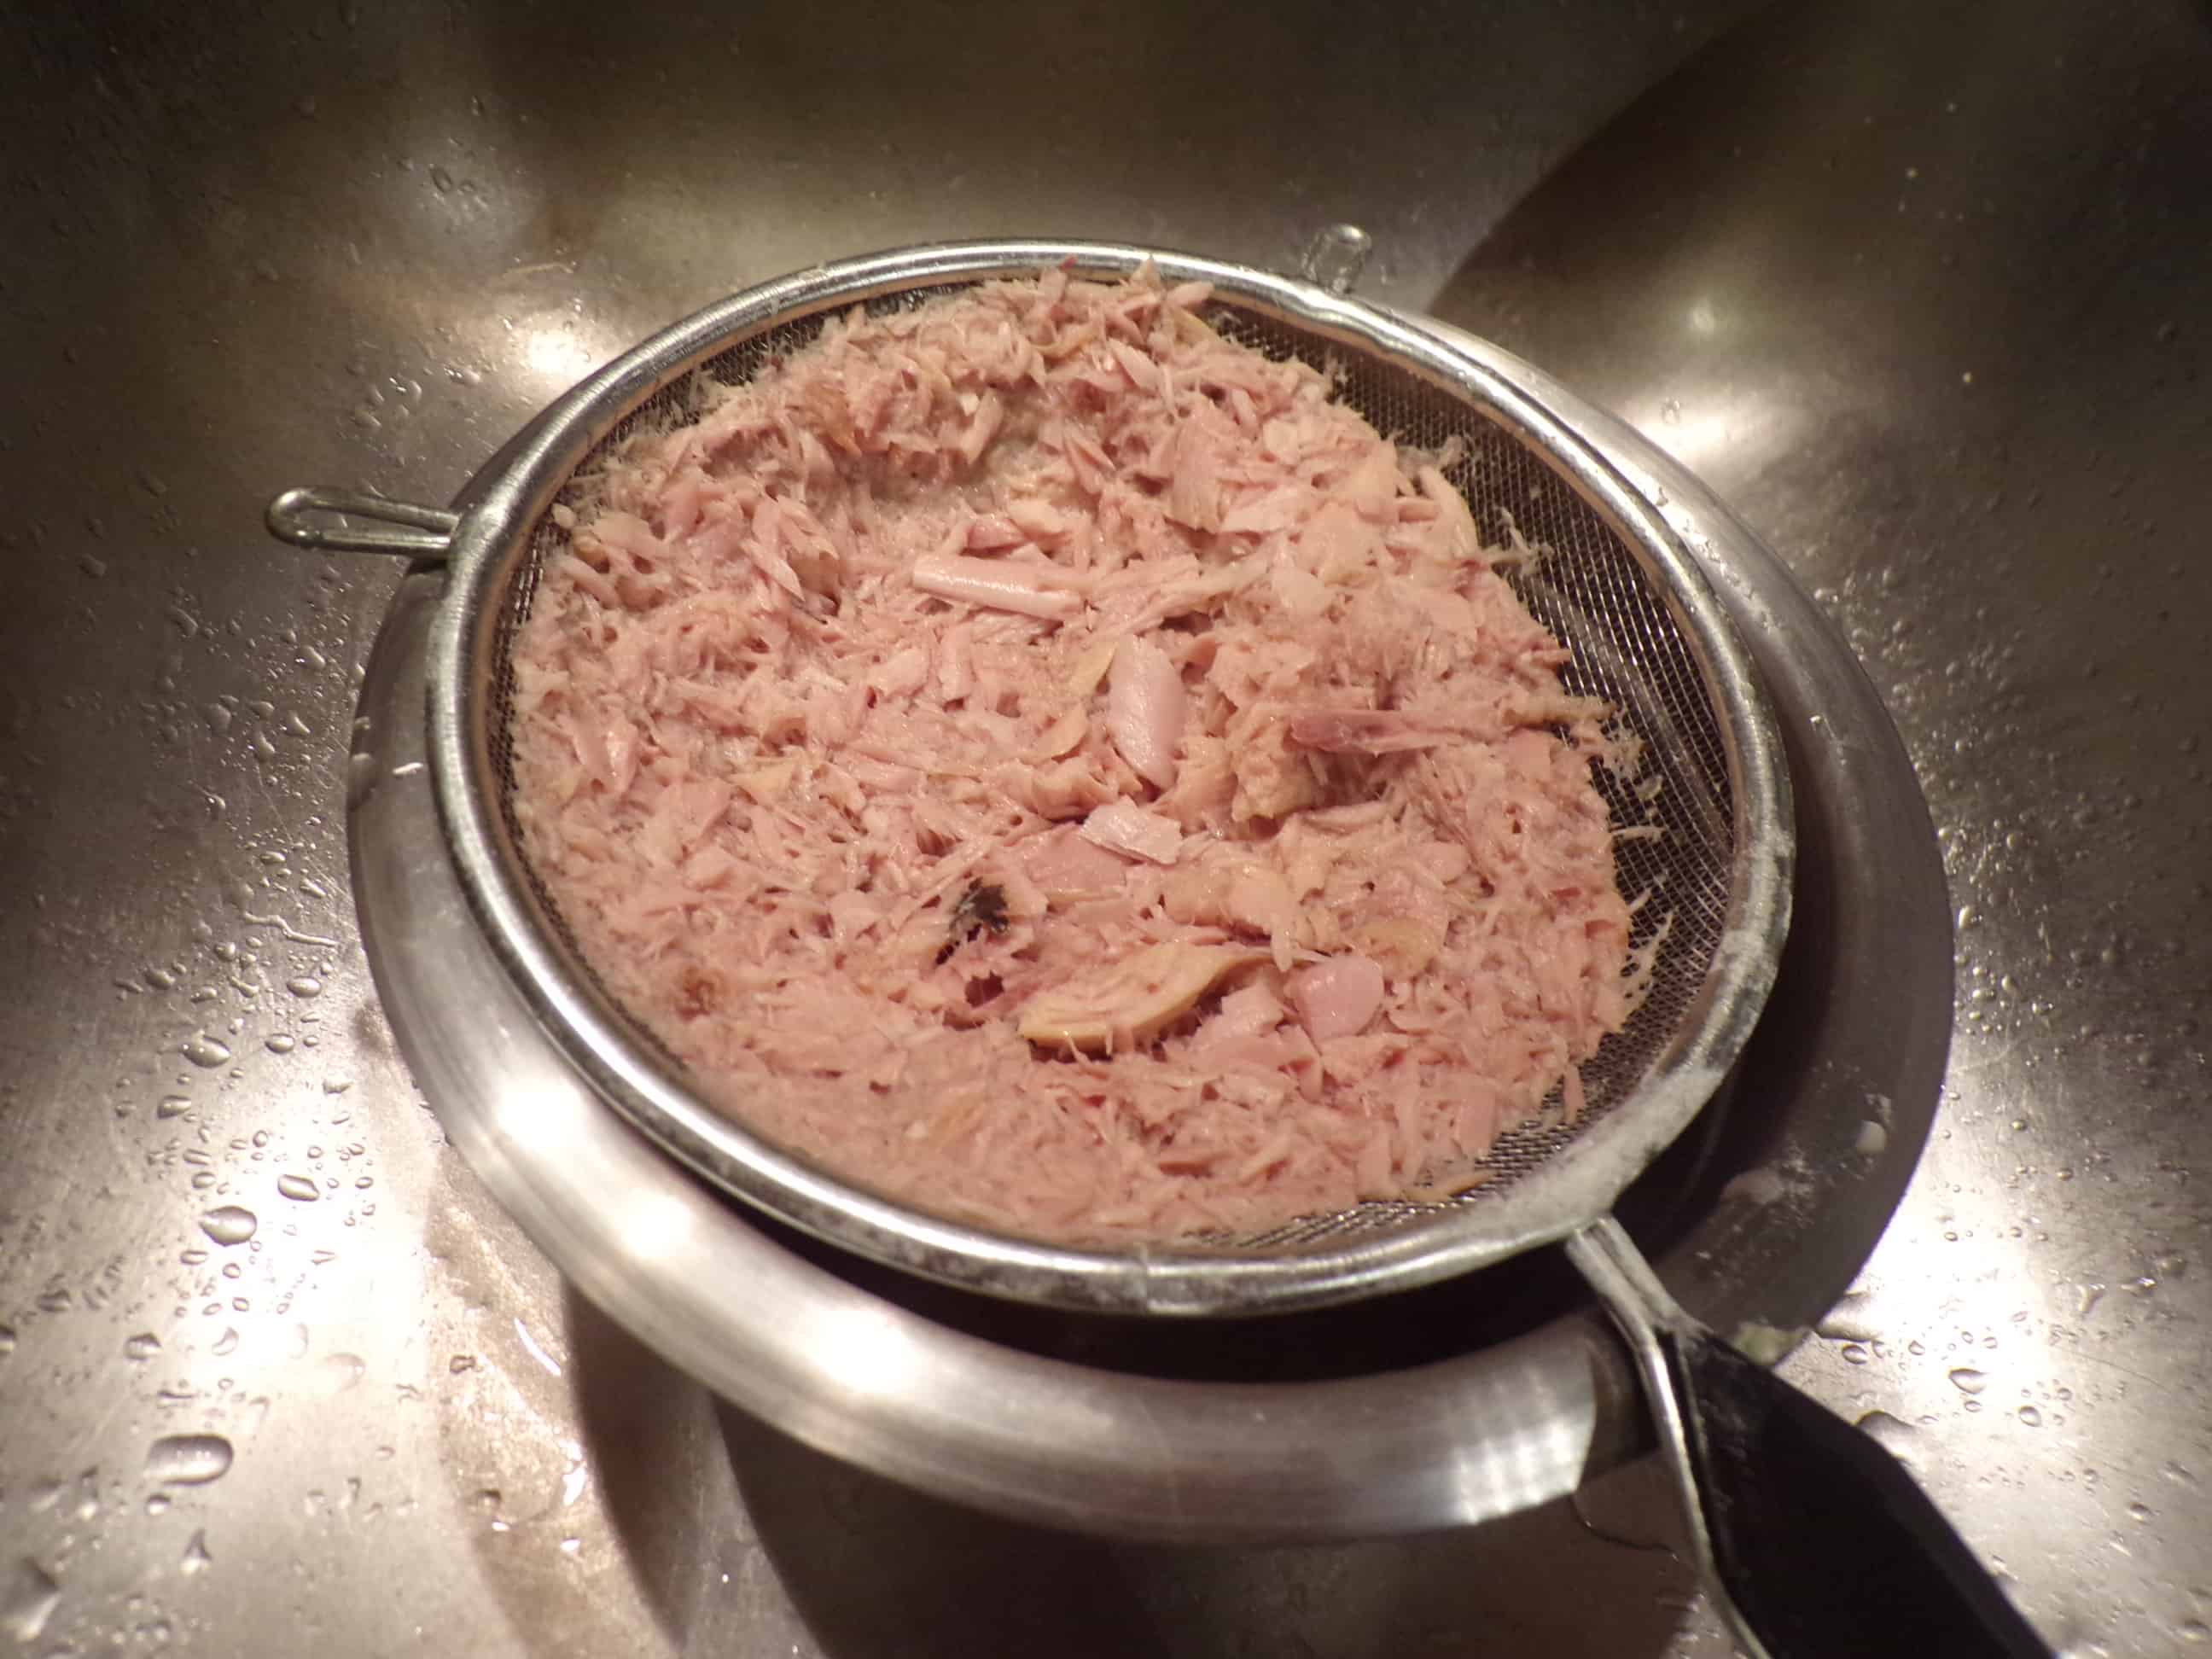 Rinsing extra sodium from canned tuna